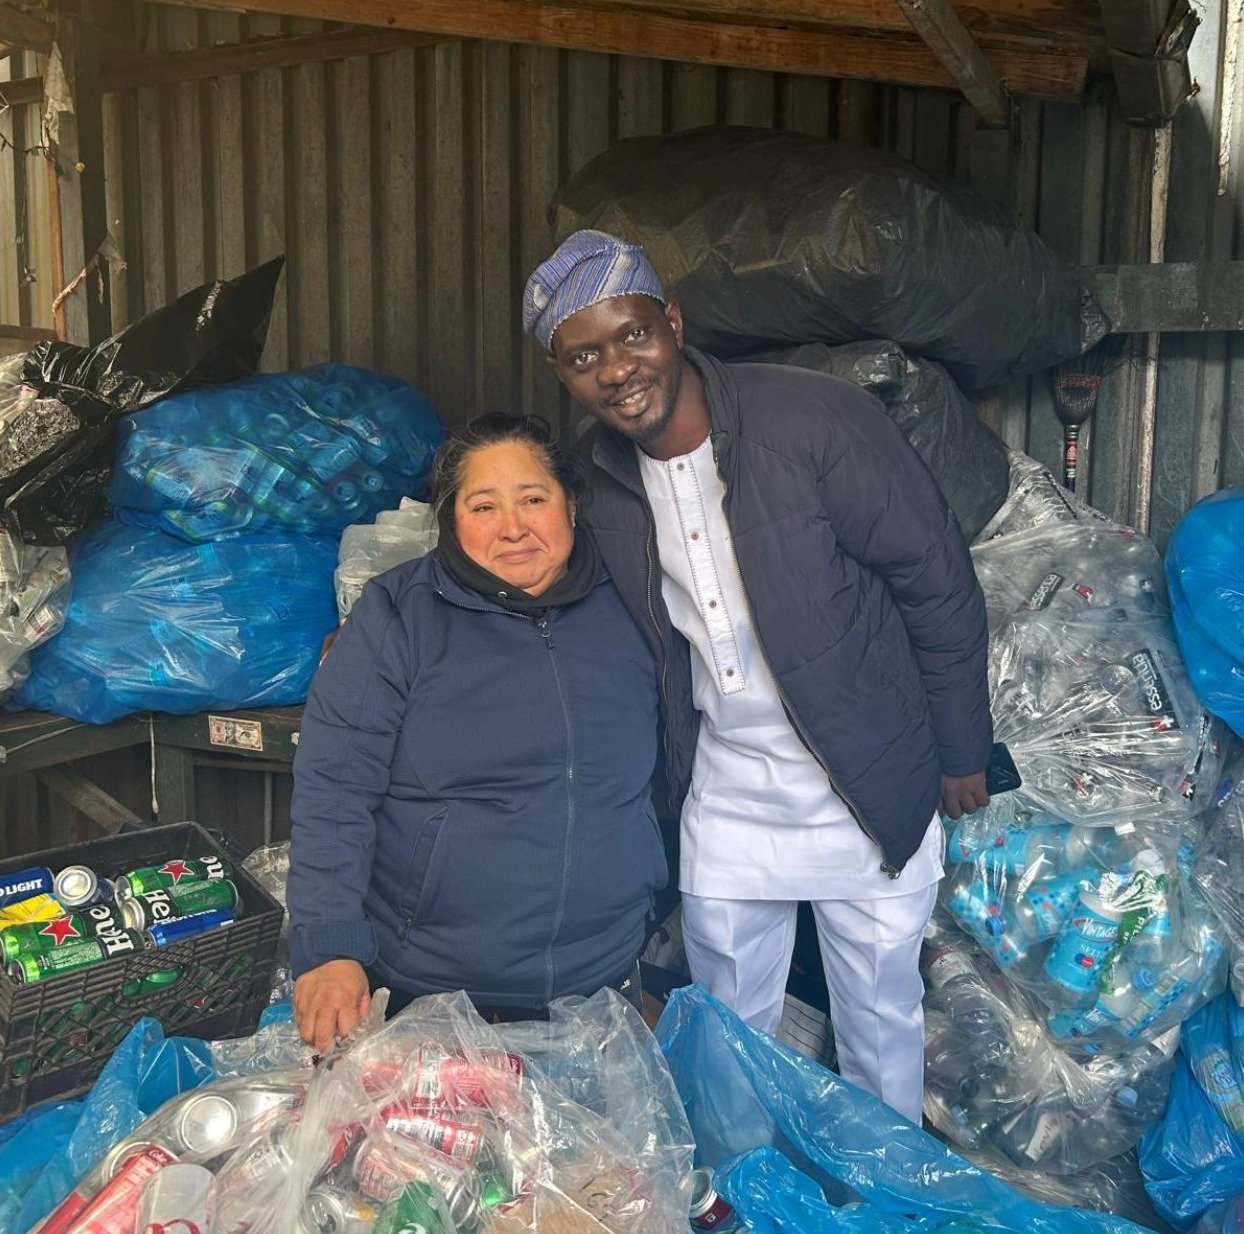 Recyclers across the globe unite! Thanks World Connect  for introducing Nigerian grantee Adetunwase Adenle, founder of Slum Art, to NYC grantee Josefa Marin, founder of the Alliance of Independent Recyclers NYC!